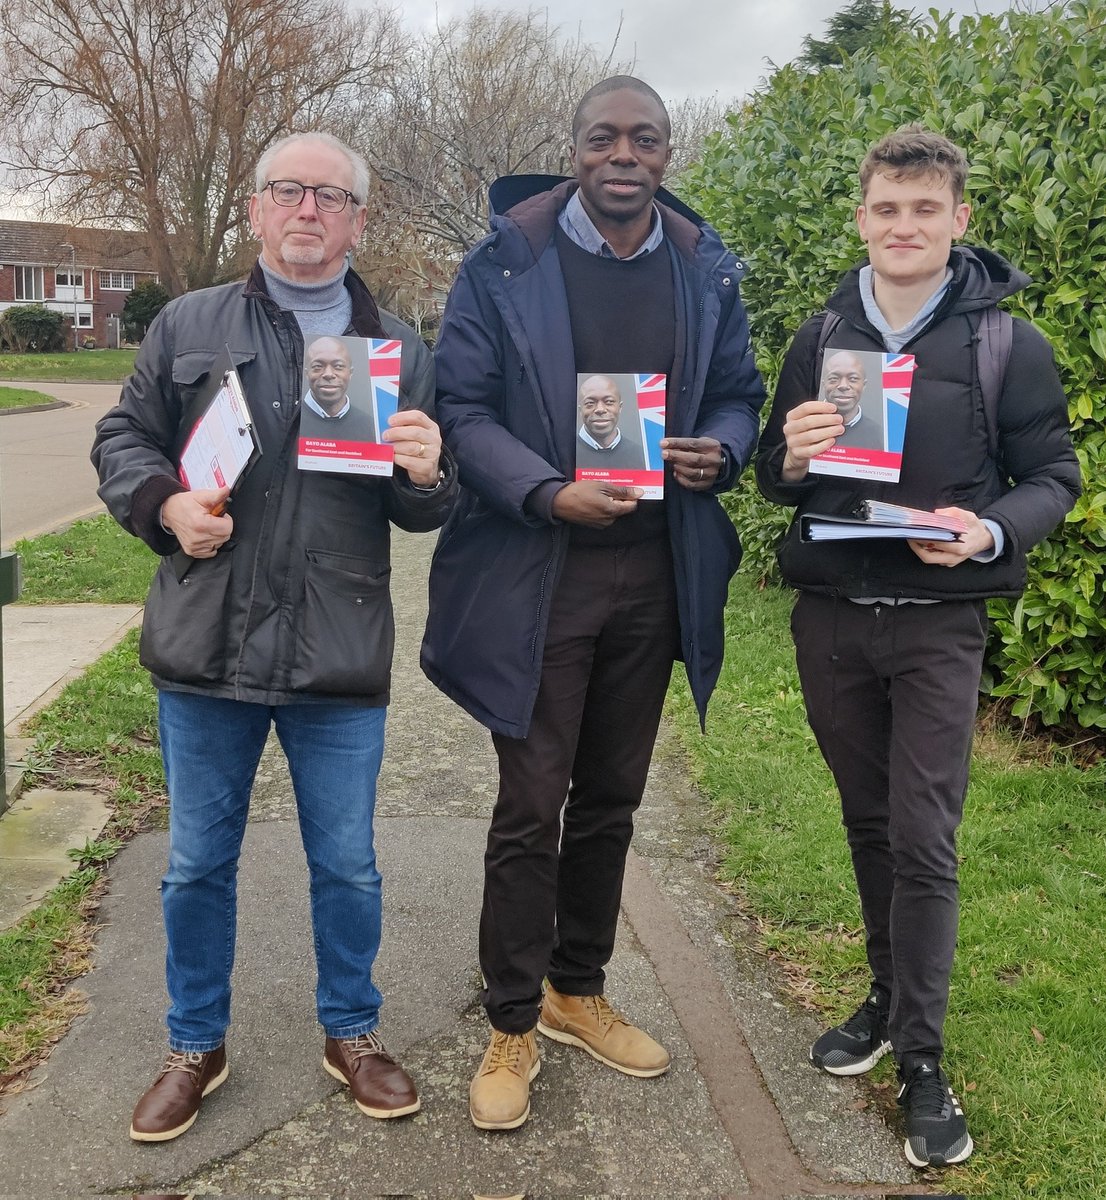 We had an amazing weekend out in #Southchurch & #GreatWakering, generating good connections and some casework. This is how we can support these communities better🌹

#backbayo #LabourGain #Thechangeweneed